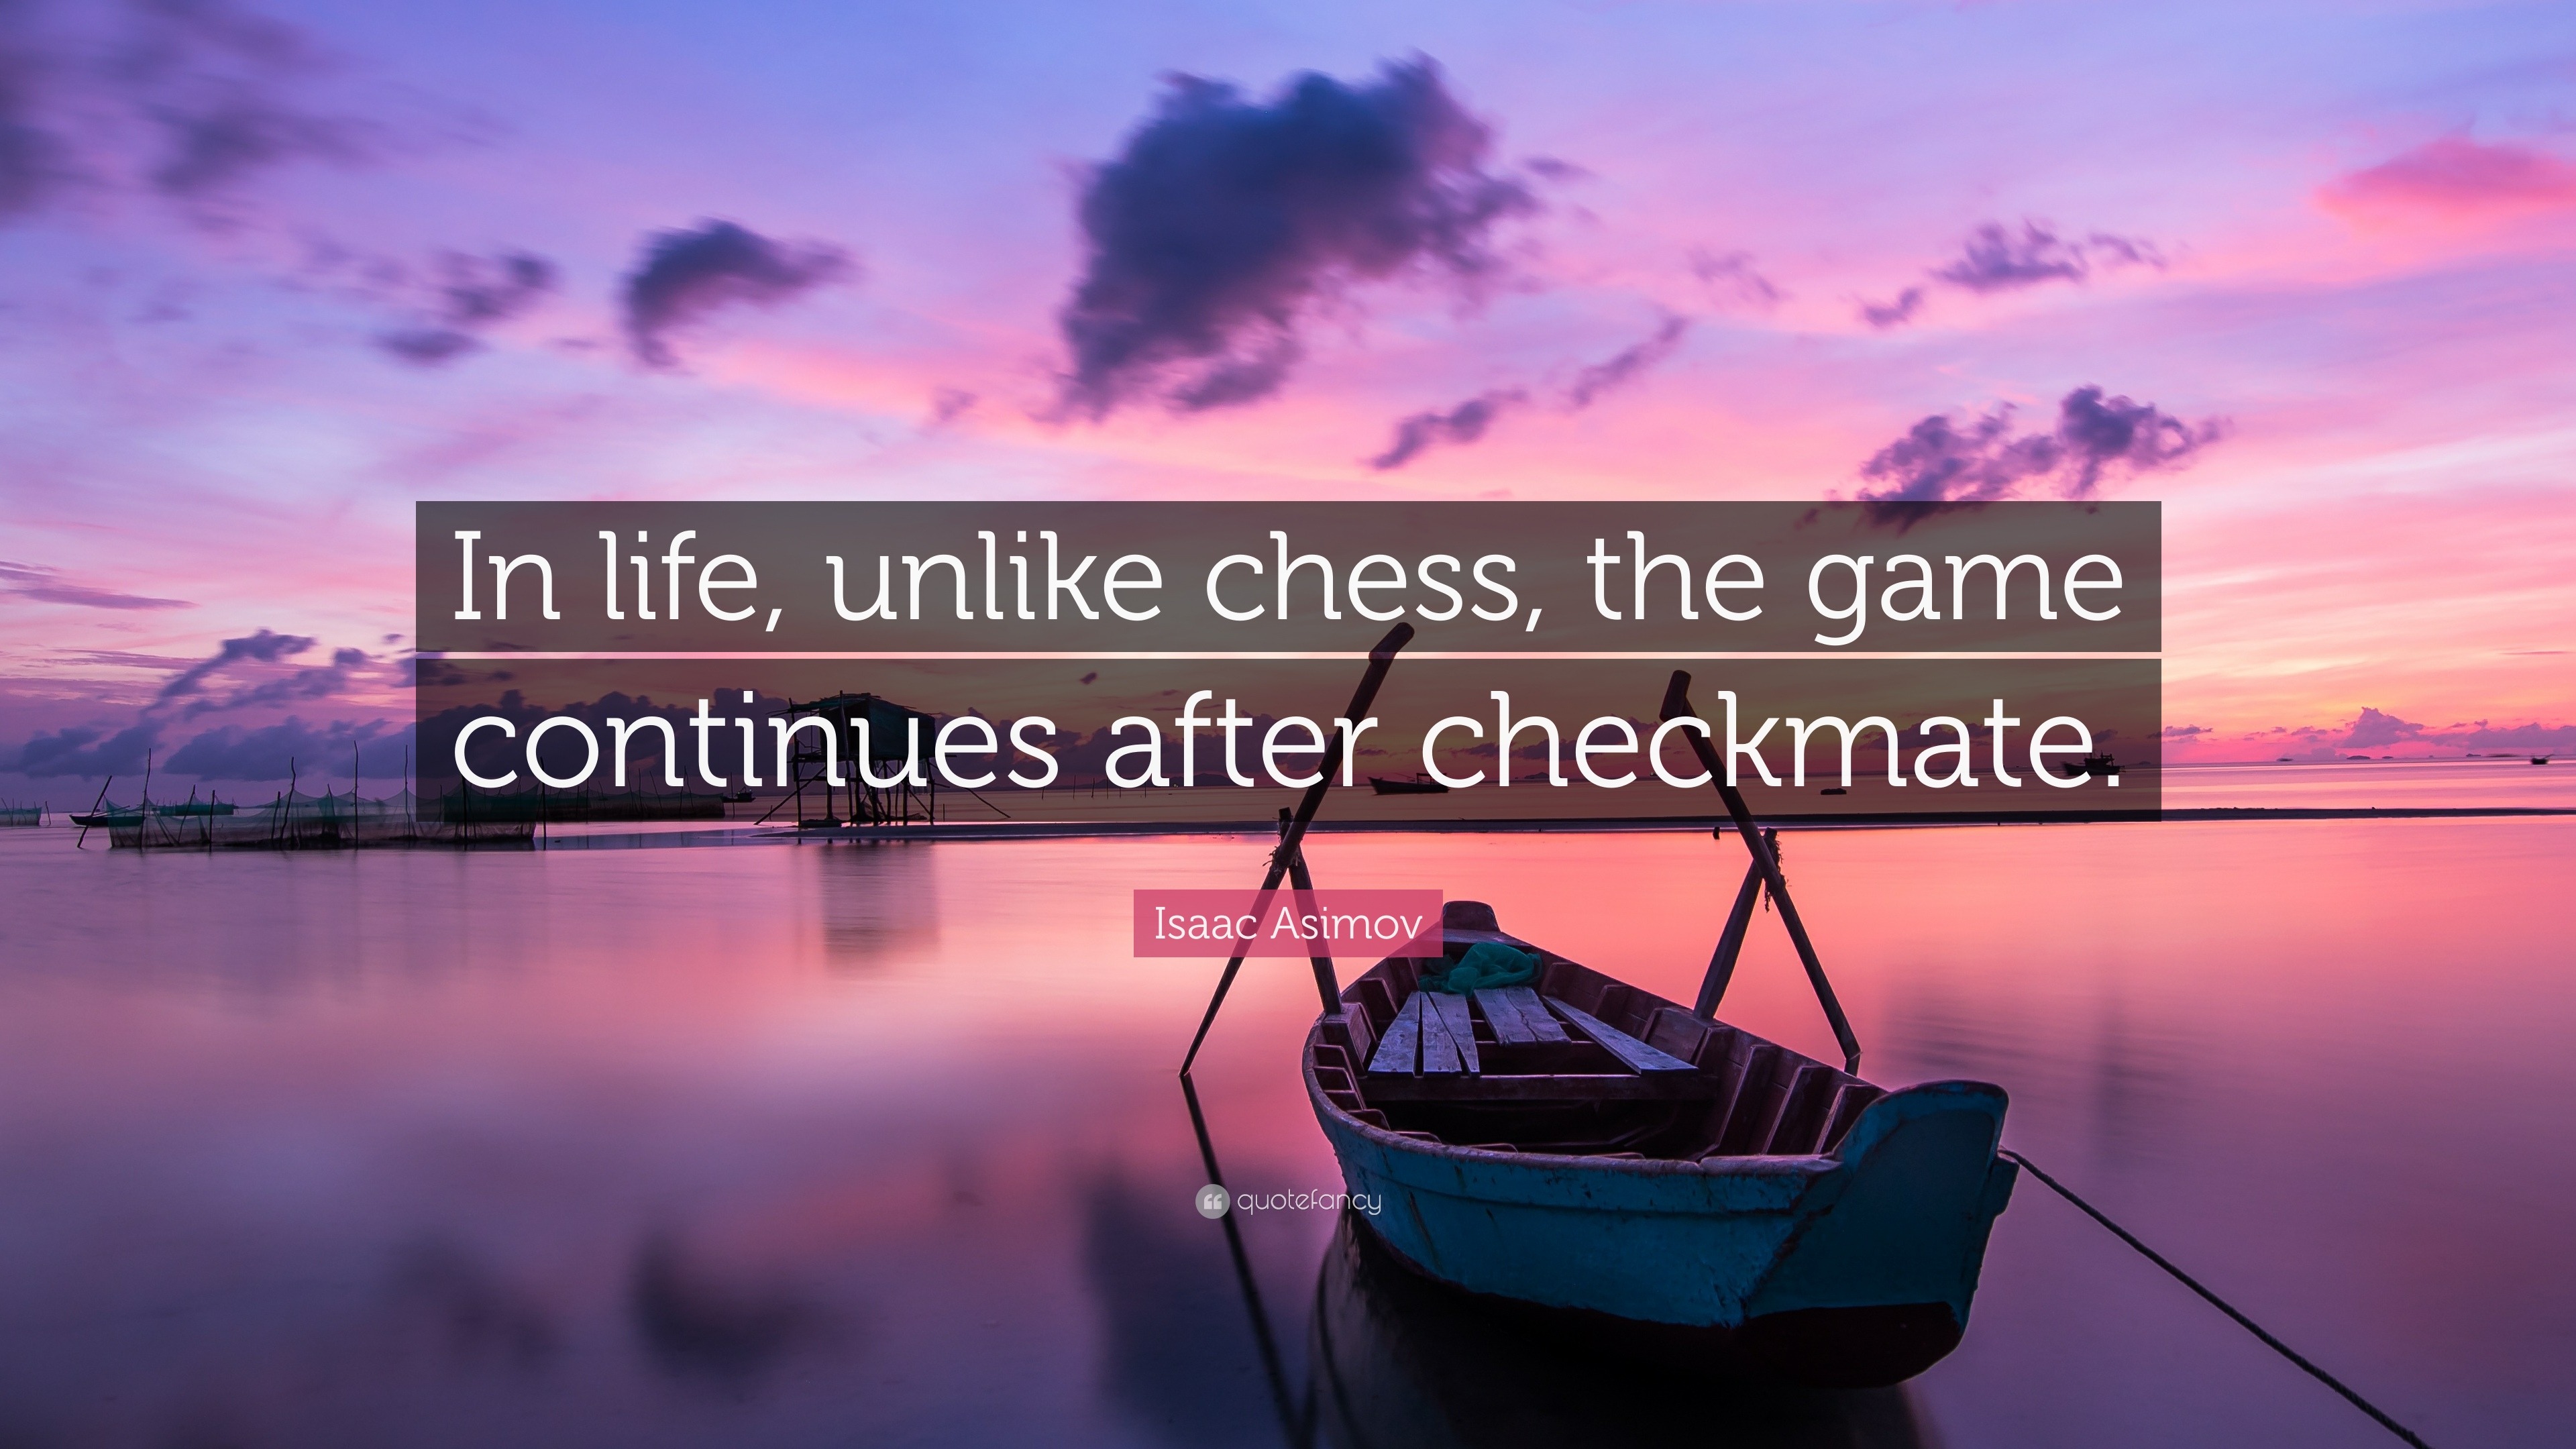 Isaac Asimov Quote: In life, unlike chess, the game continues after  checkmate.